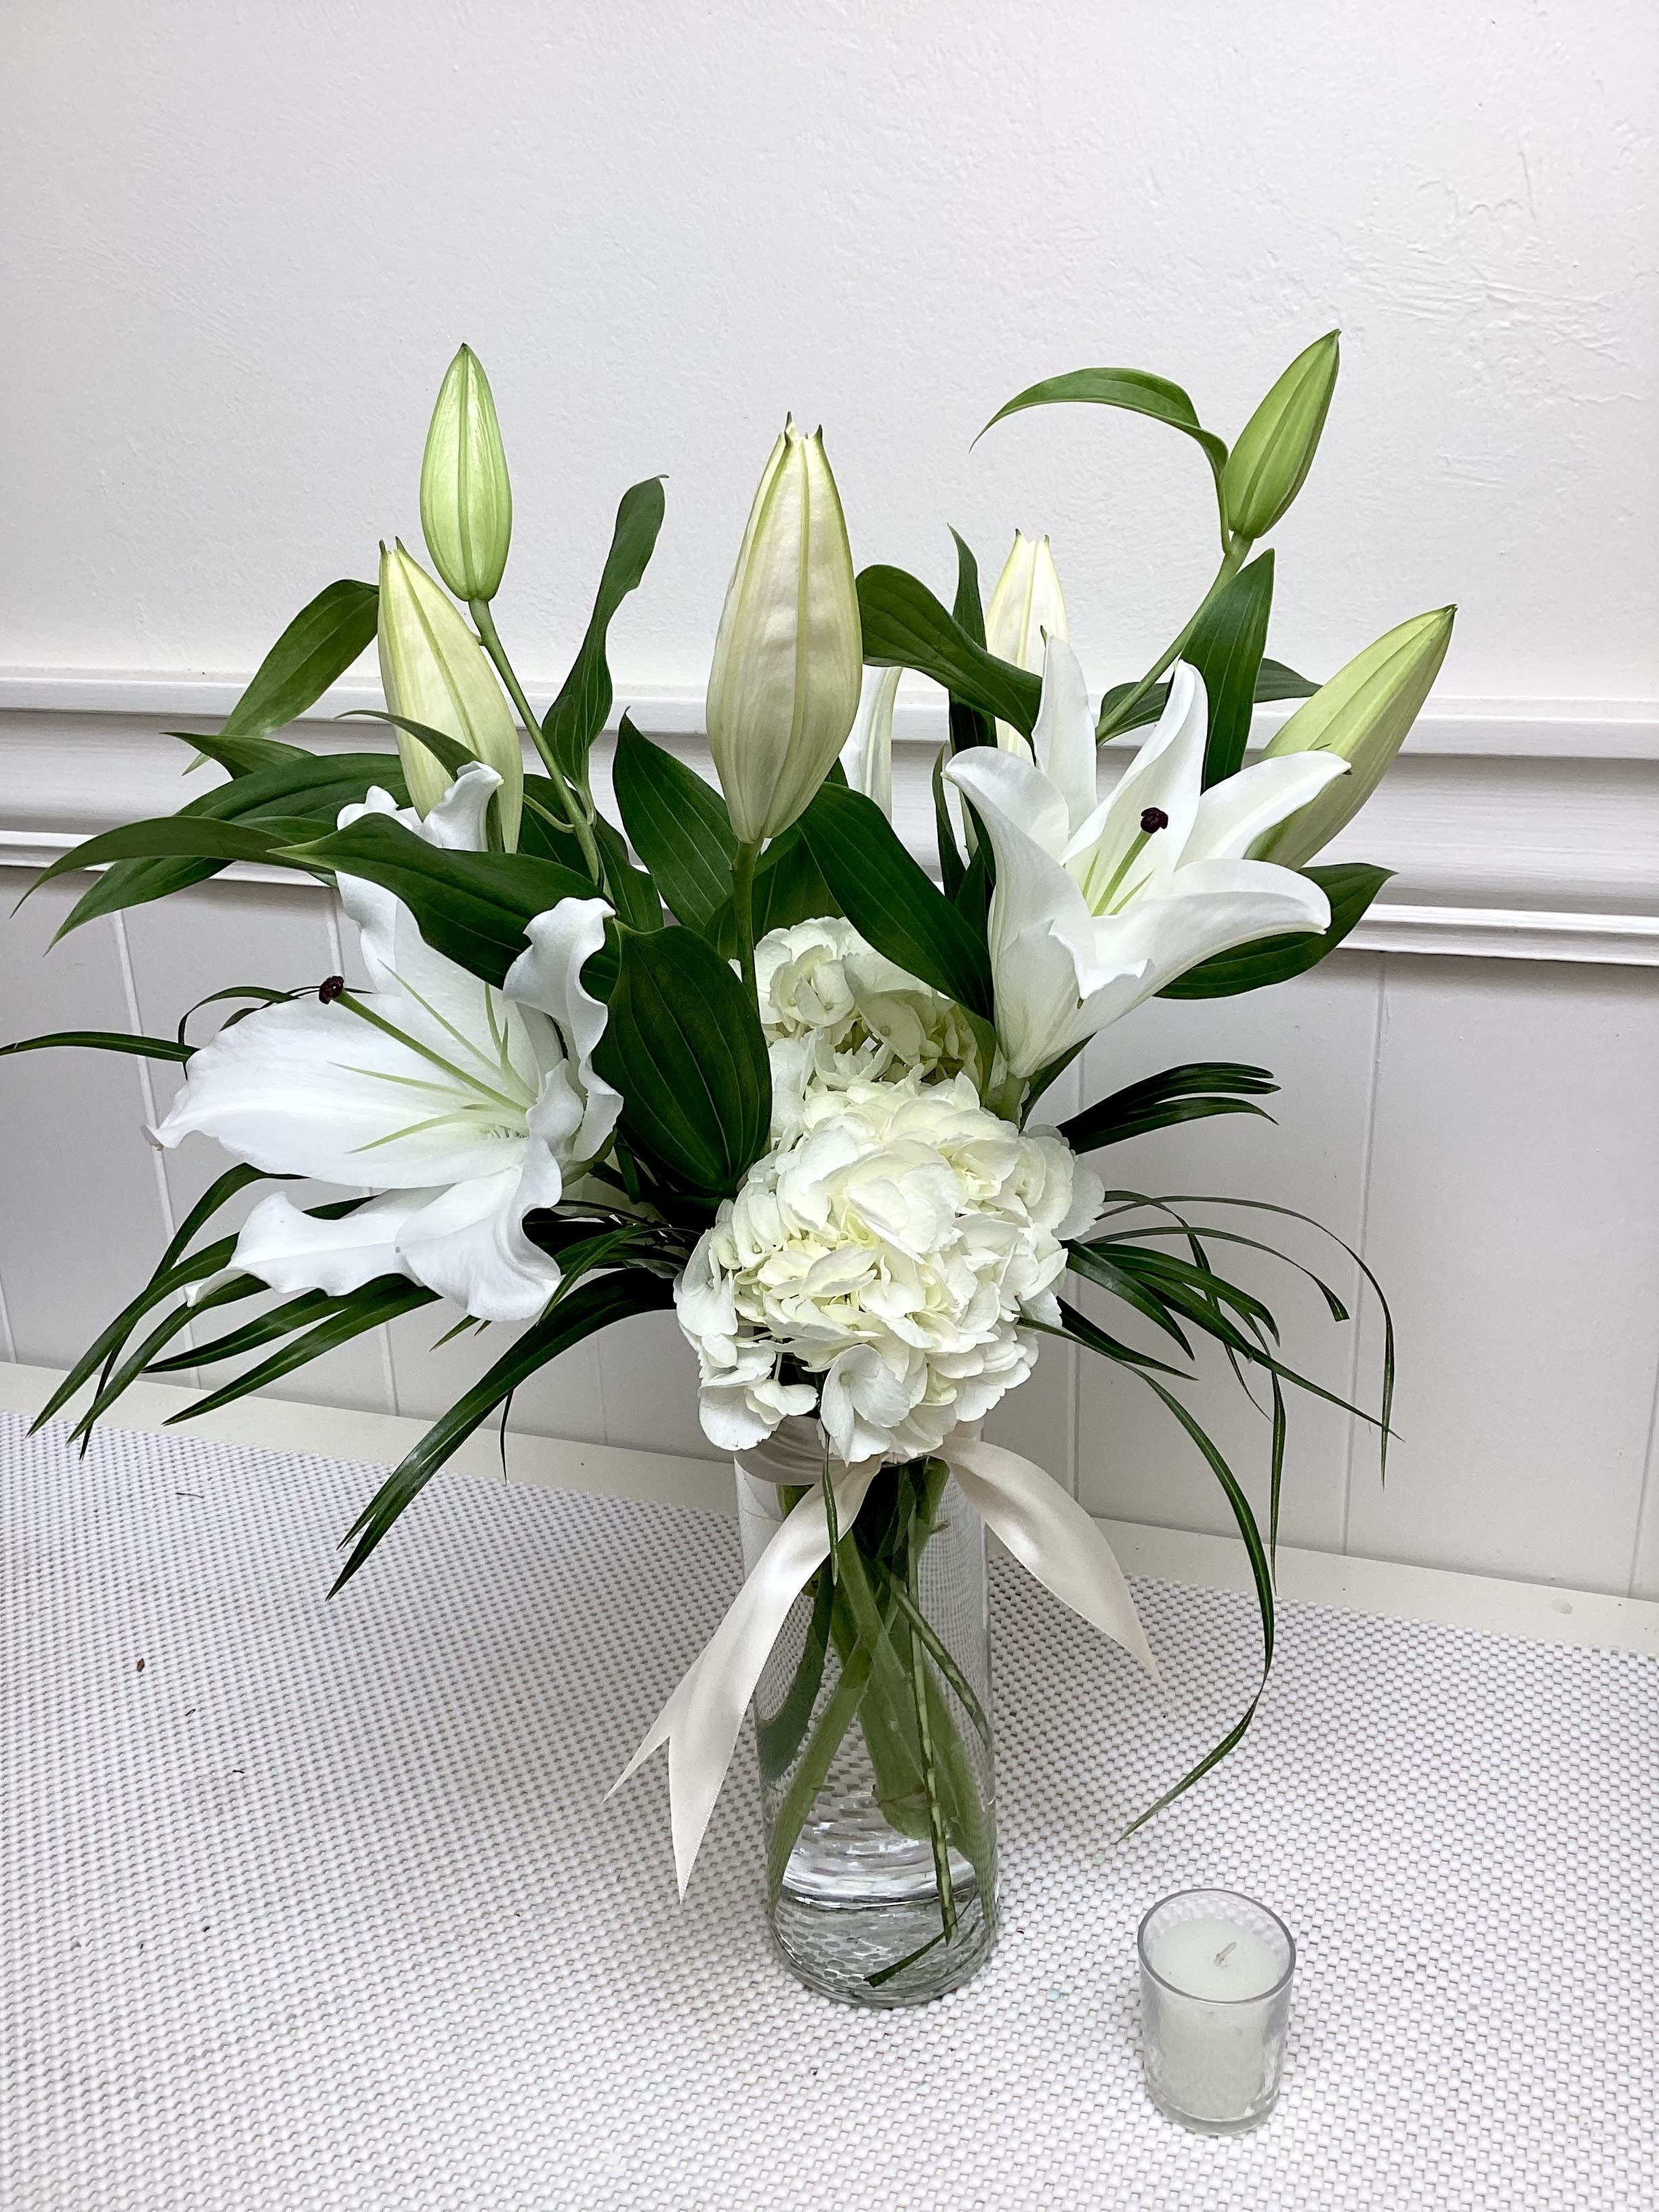 Sweet Fragrance - This statuesque and aromatic arrangement includes fragrant lilies, hydrangea, and Phoenix Palm. 